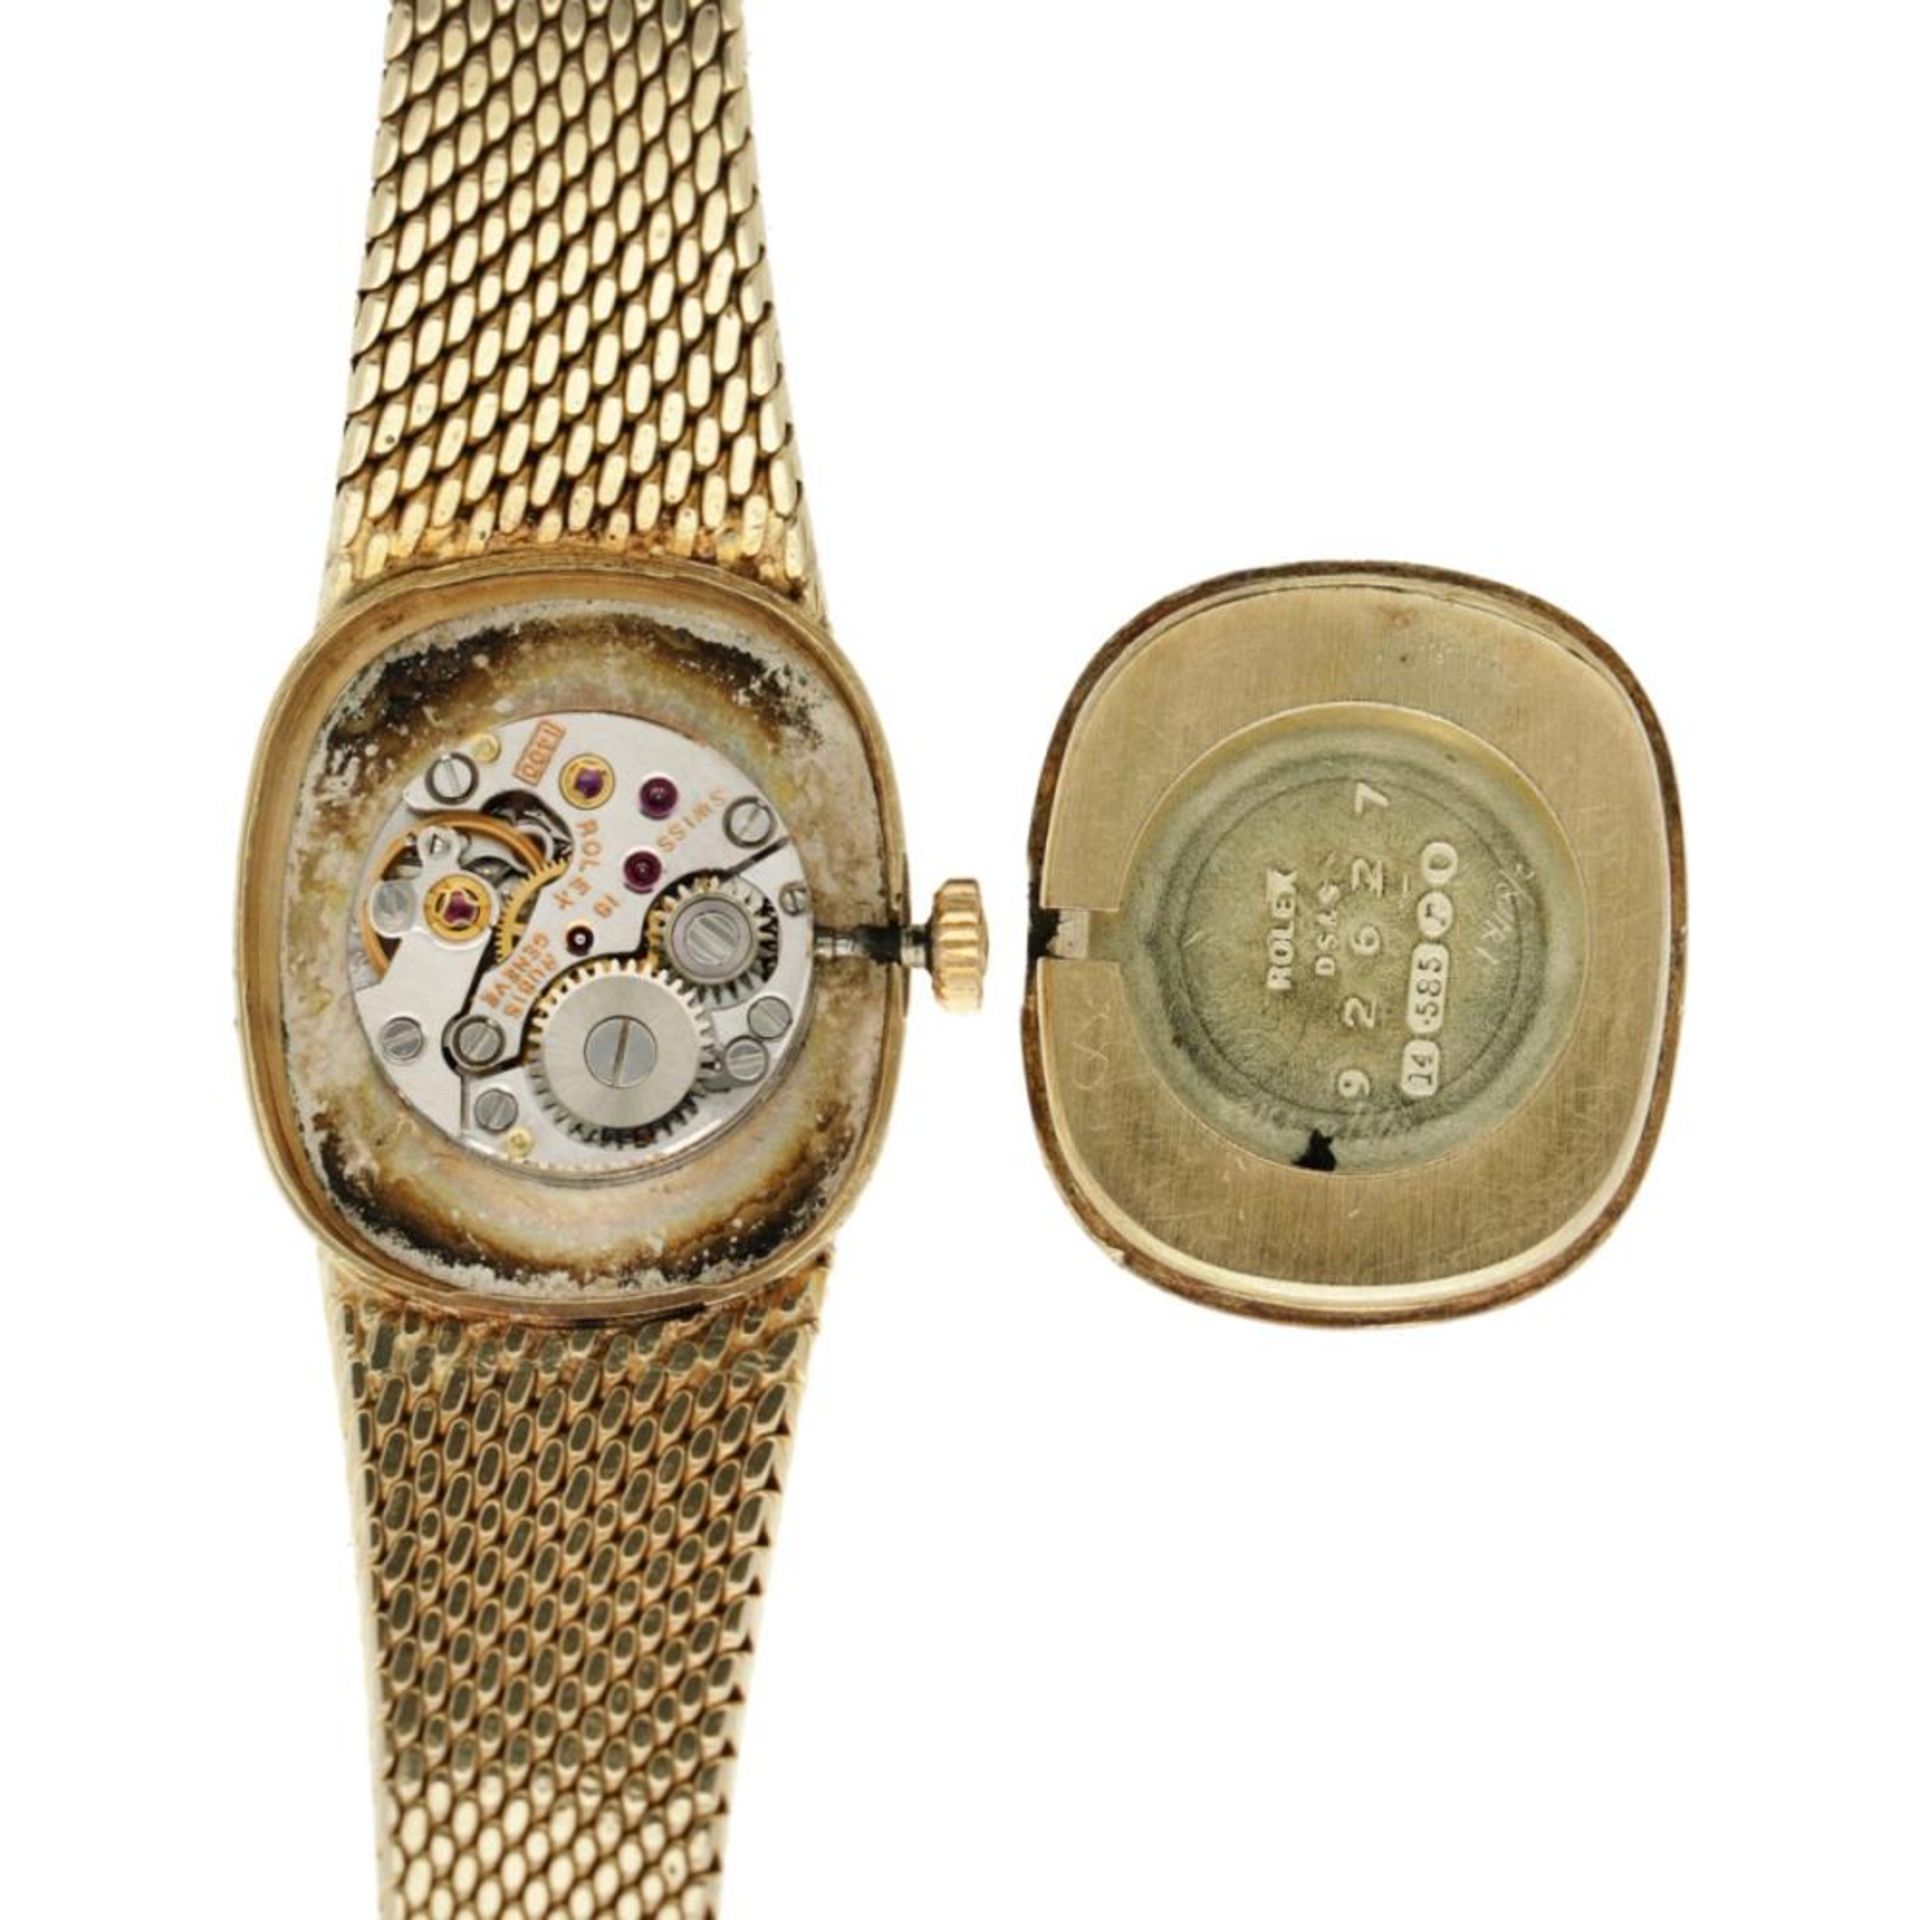 Rolex Precision 92627 - Ladies watch - approx. 1957. - Image 6 of 7